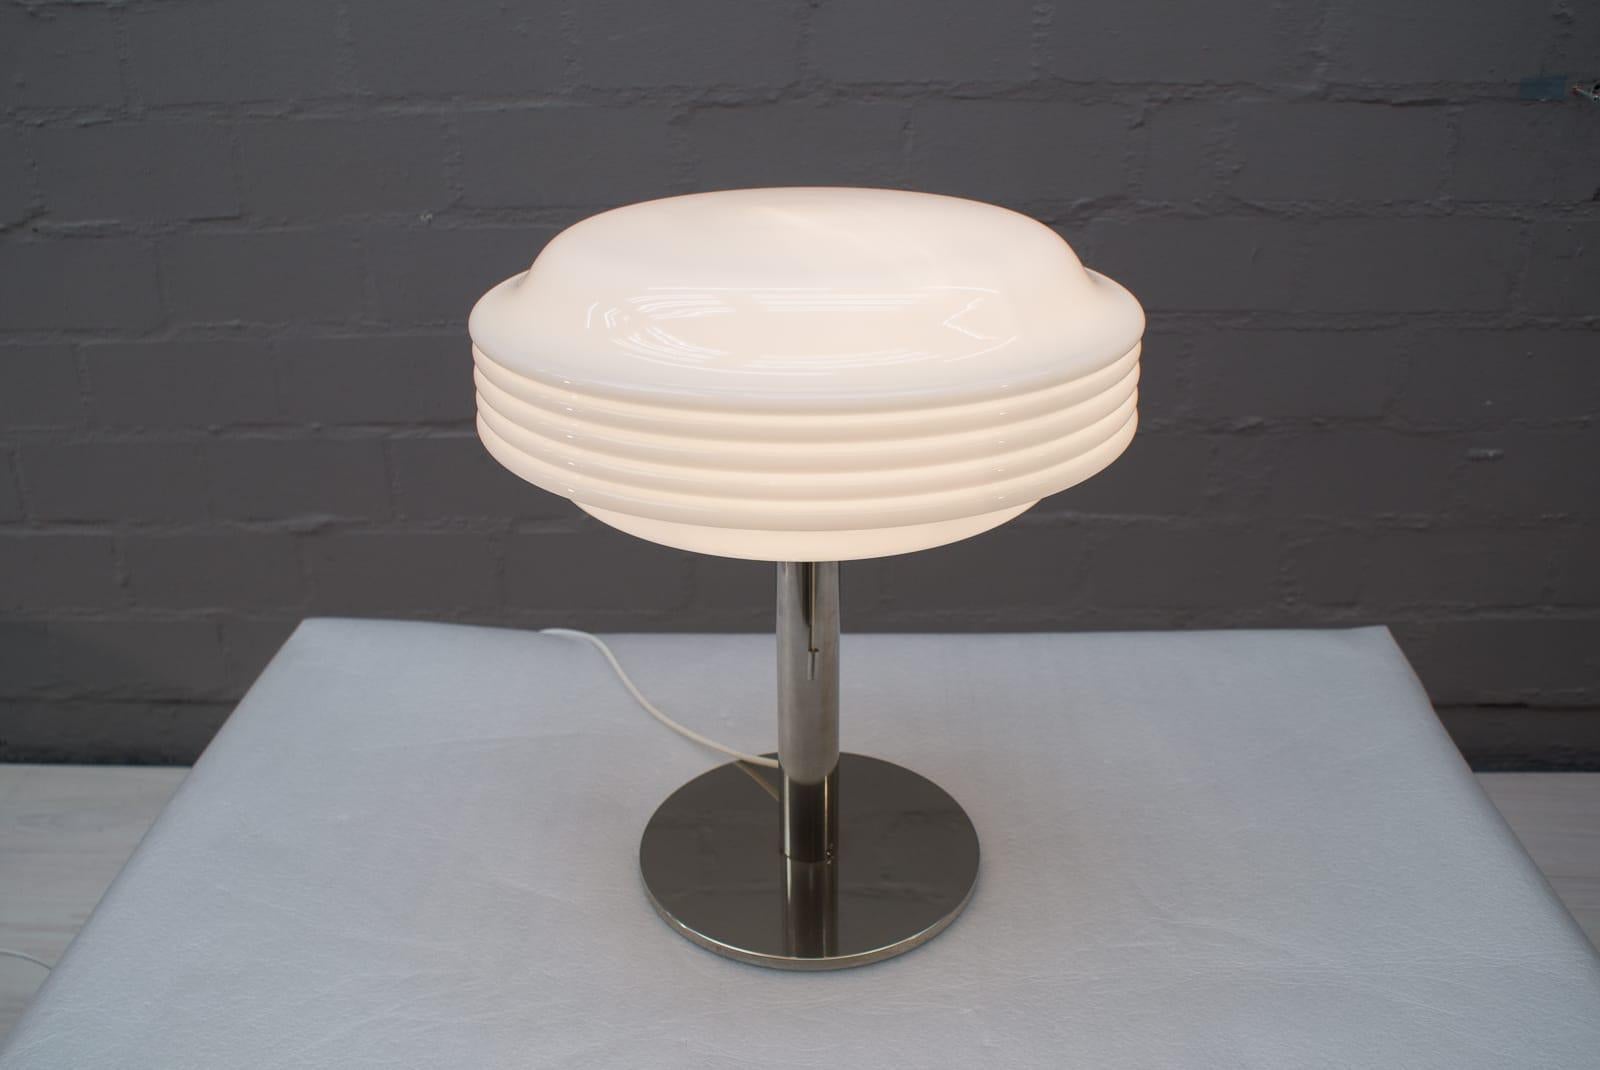 Lovely Space Age Table Lamp by Temde Leuchten, Switzerland, 1970s In Good Condition For Sale In Nürnberg, Bayern